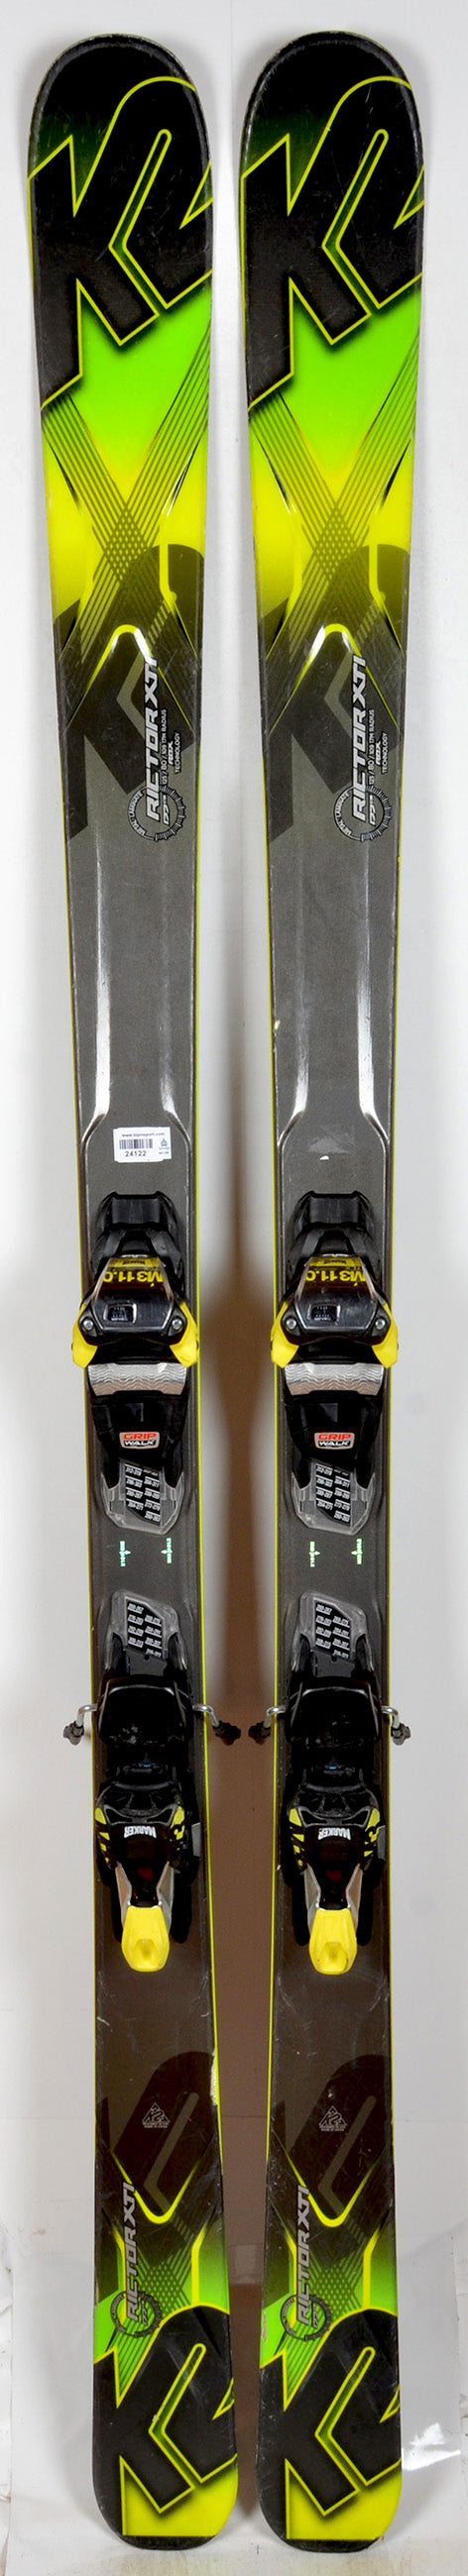 K2 RICTOR 80 XTI - skis d'occasion